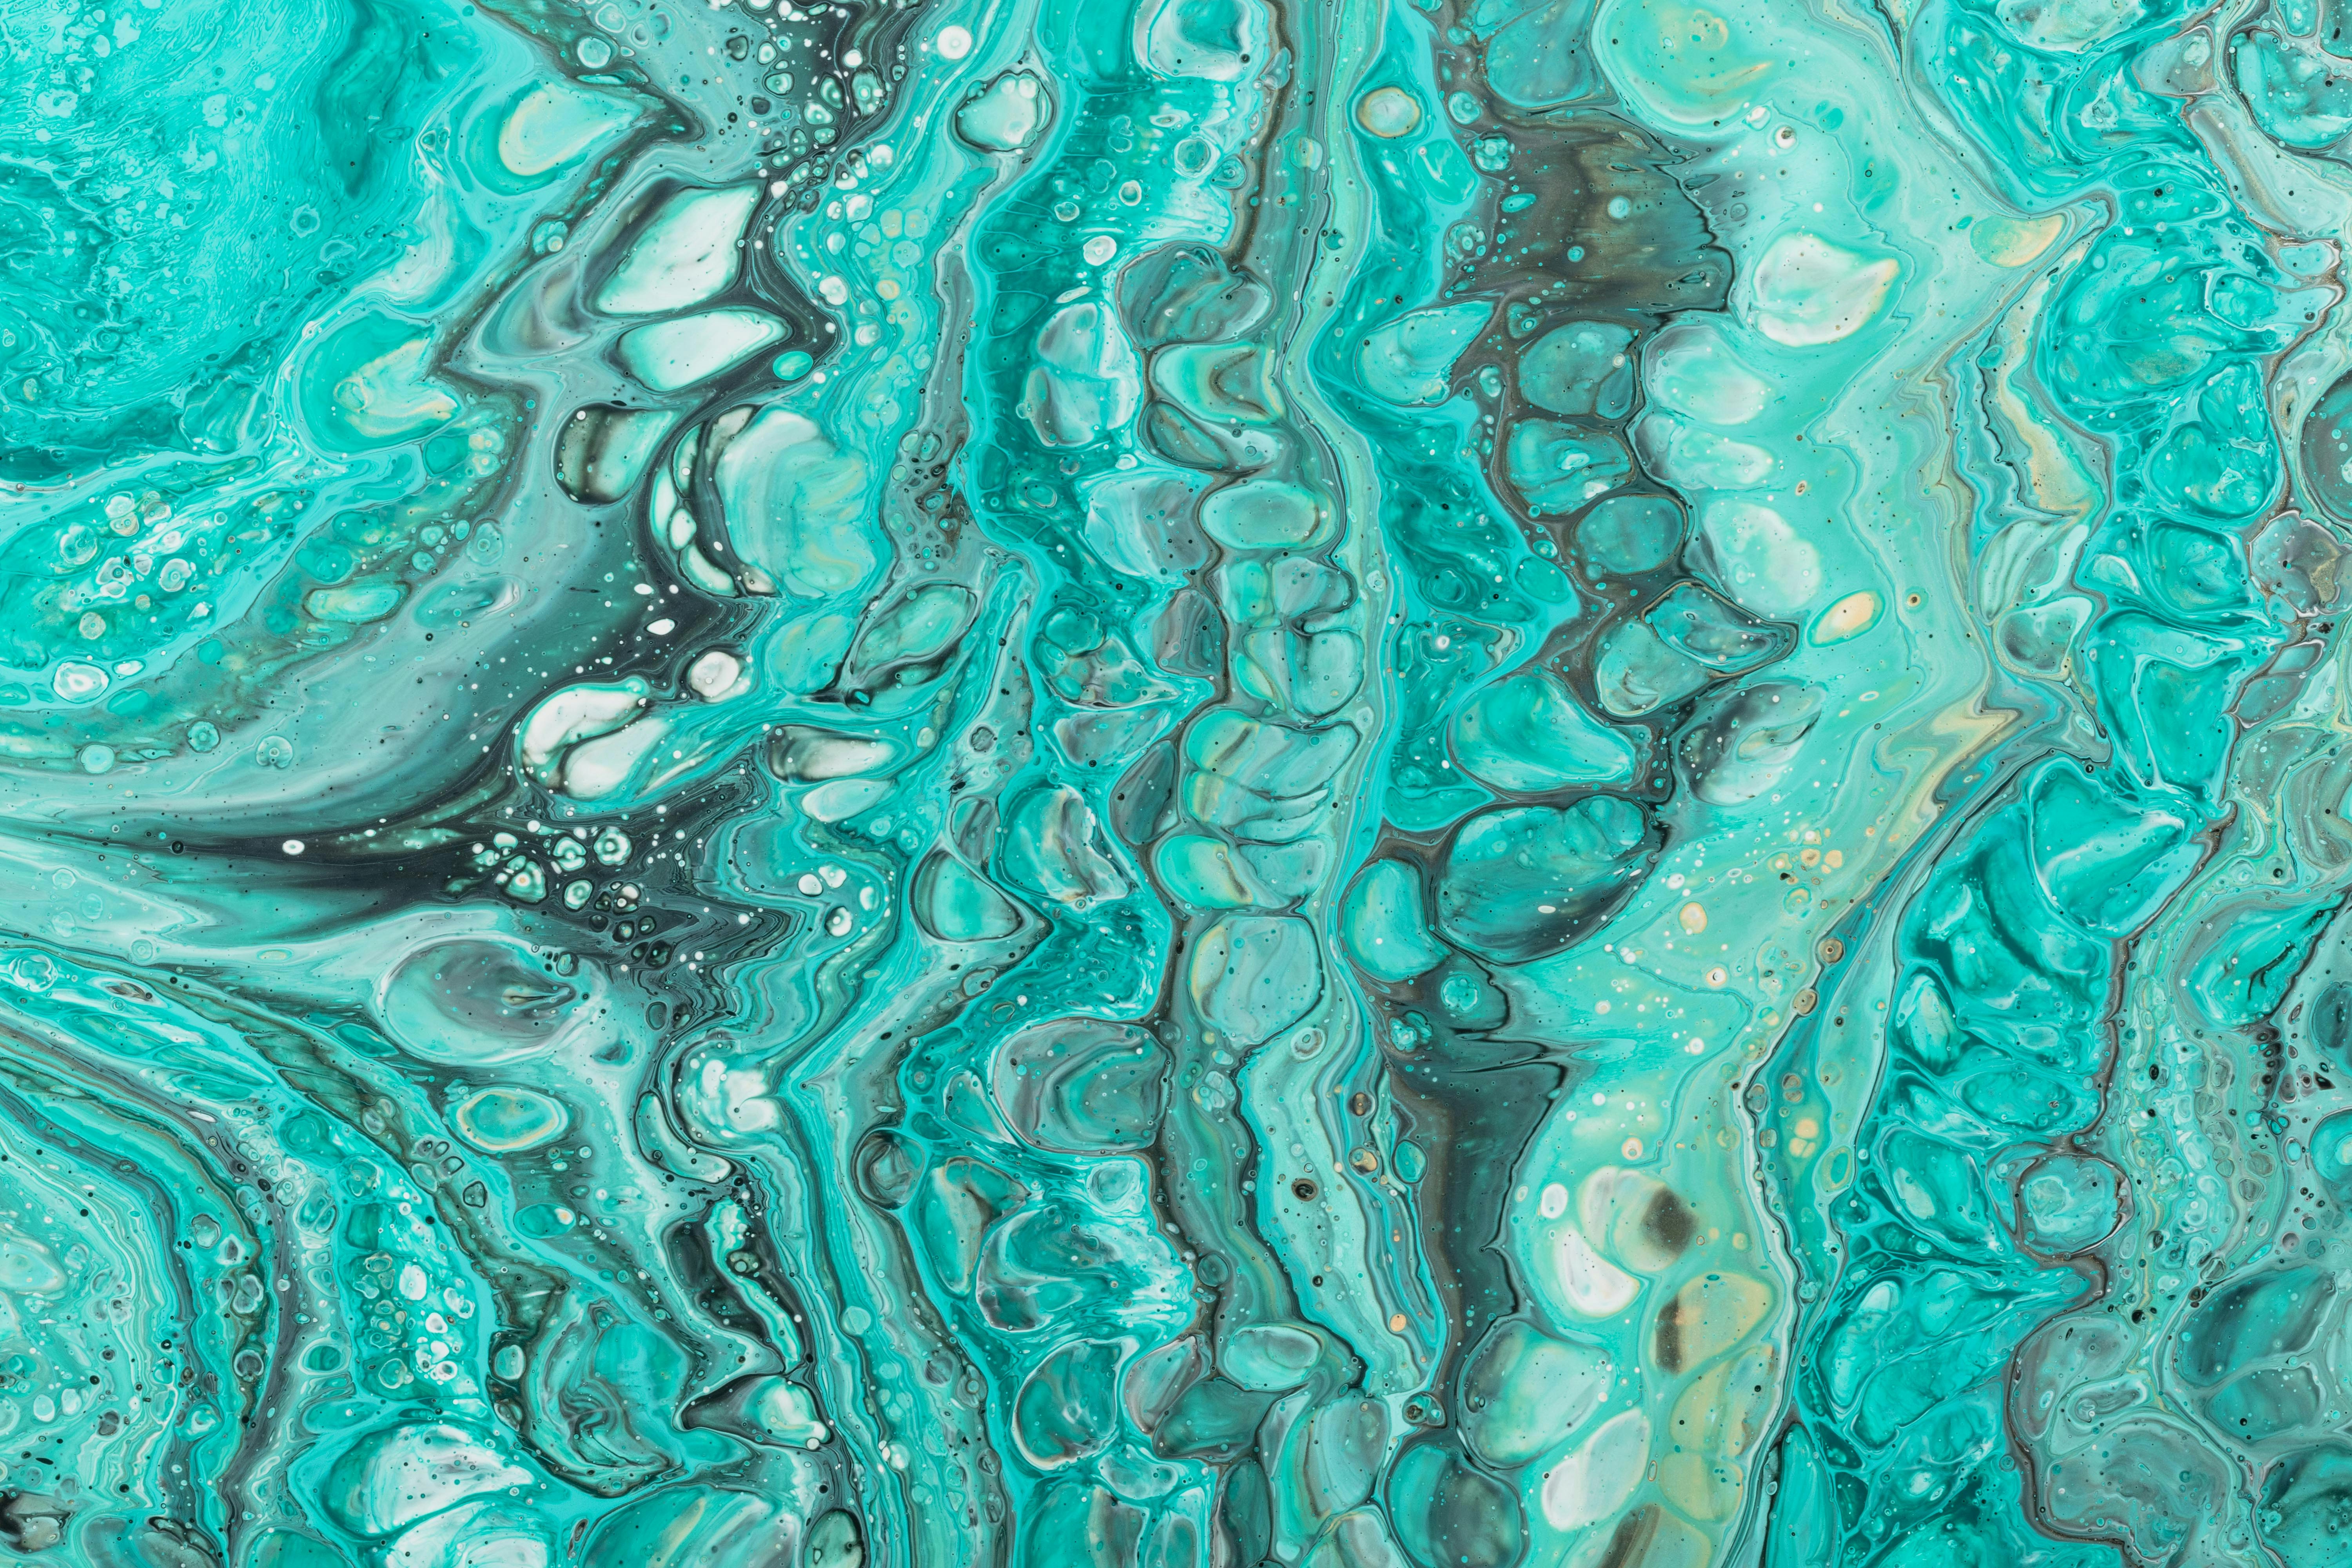 Teal is very popular in many online acrylic projects. So I went to this shop downtown that turned out to be a mine of acrylic paint. I mixed different shades of green and teal and got this marble-like pattern.